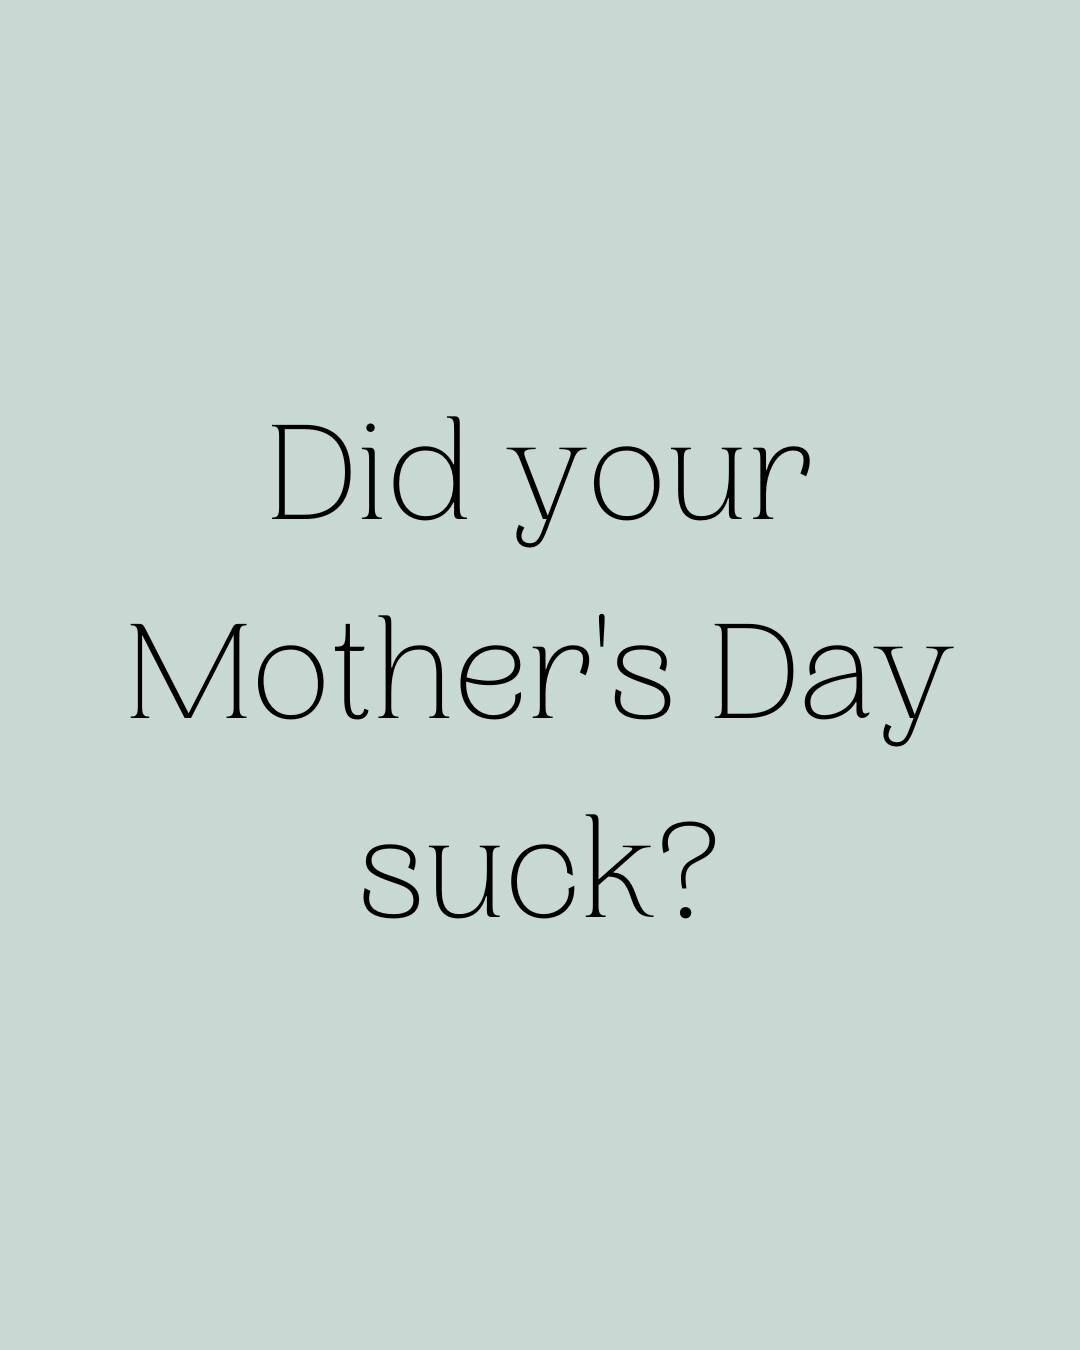 Every year I put up a post wishing everyone a happy Mother's day and reflect on the things I love about being a mum. 

But this year, as I saw all those posts pop up on my feed, I was thinking about the mums who had a crappy Mother's day. 

👉 The mu